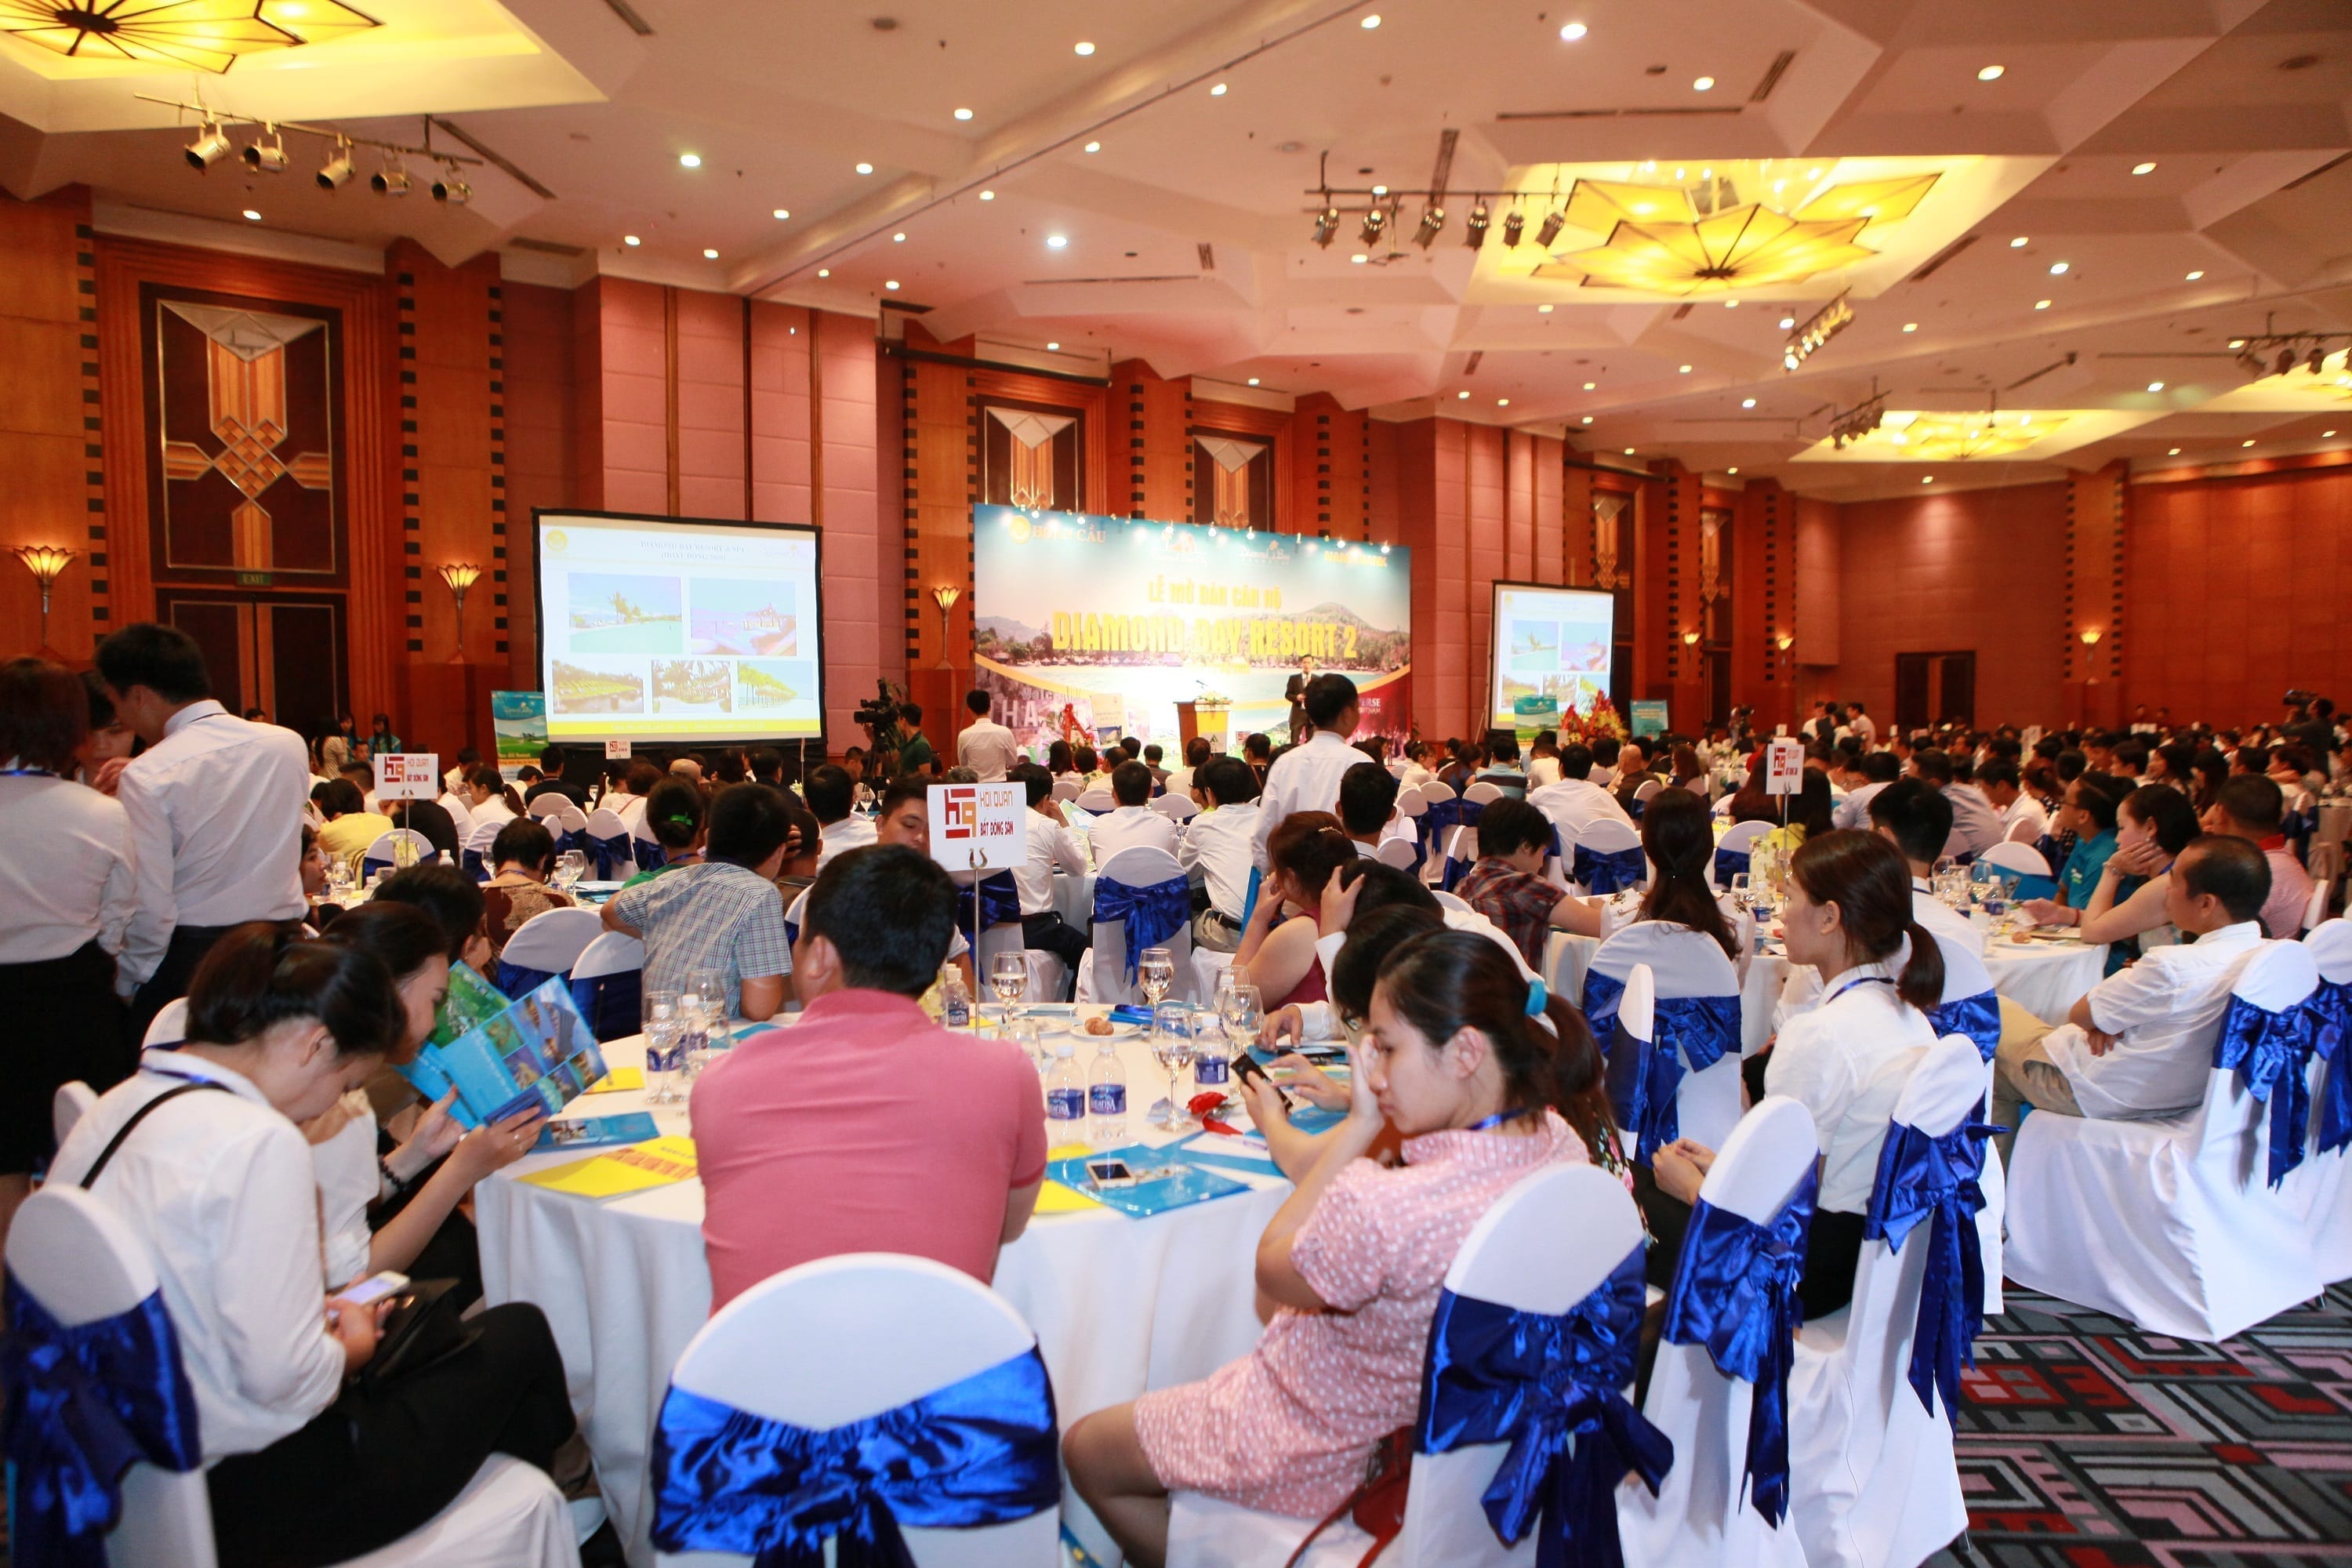 A launching event of new project in HCM